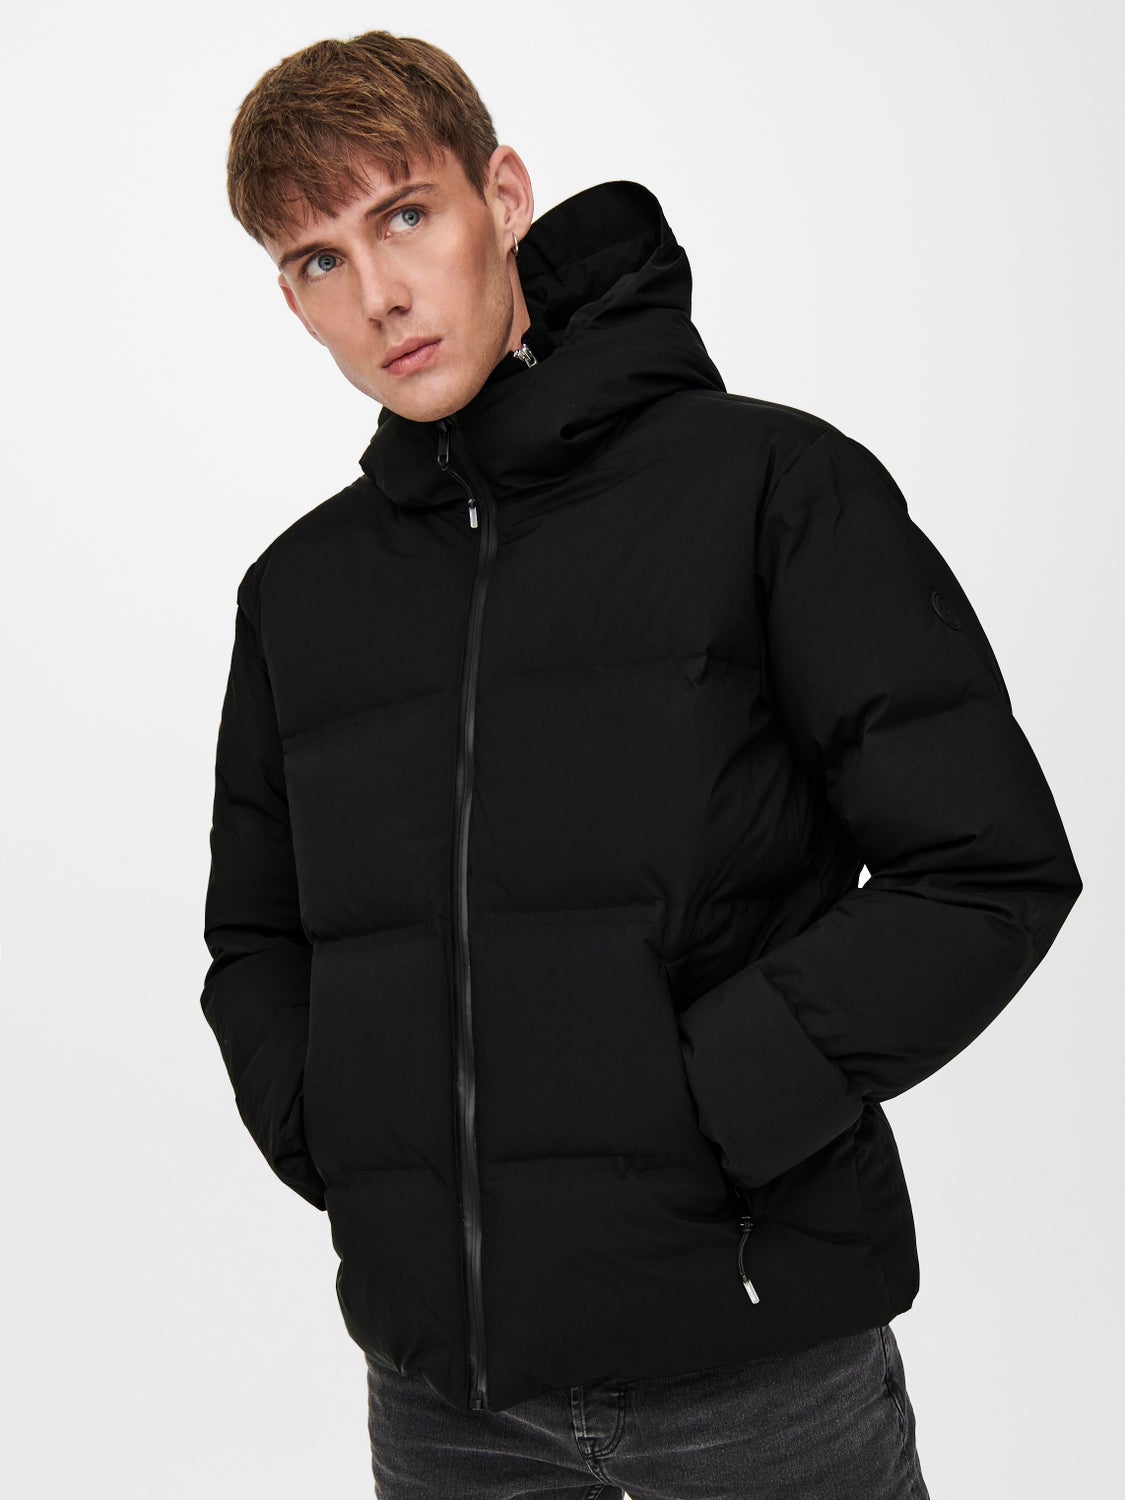 Short puffer jacket | Black | ONLY & SONS®